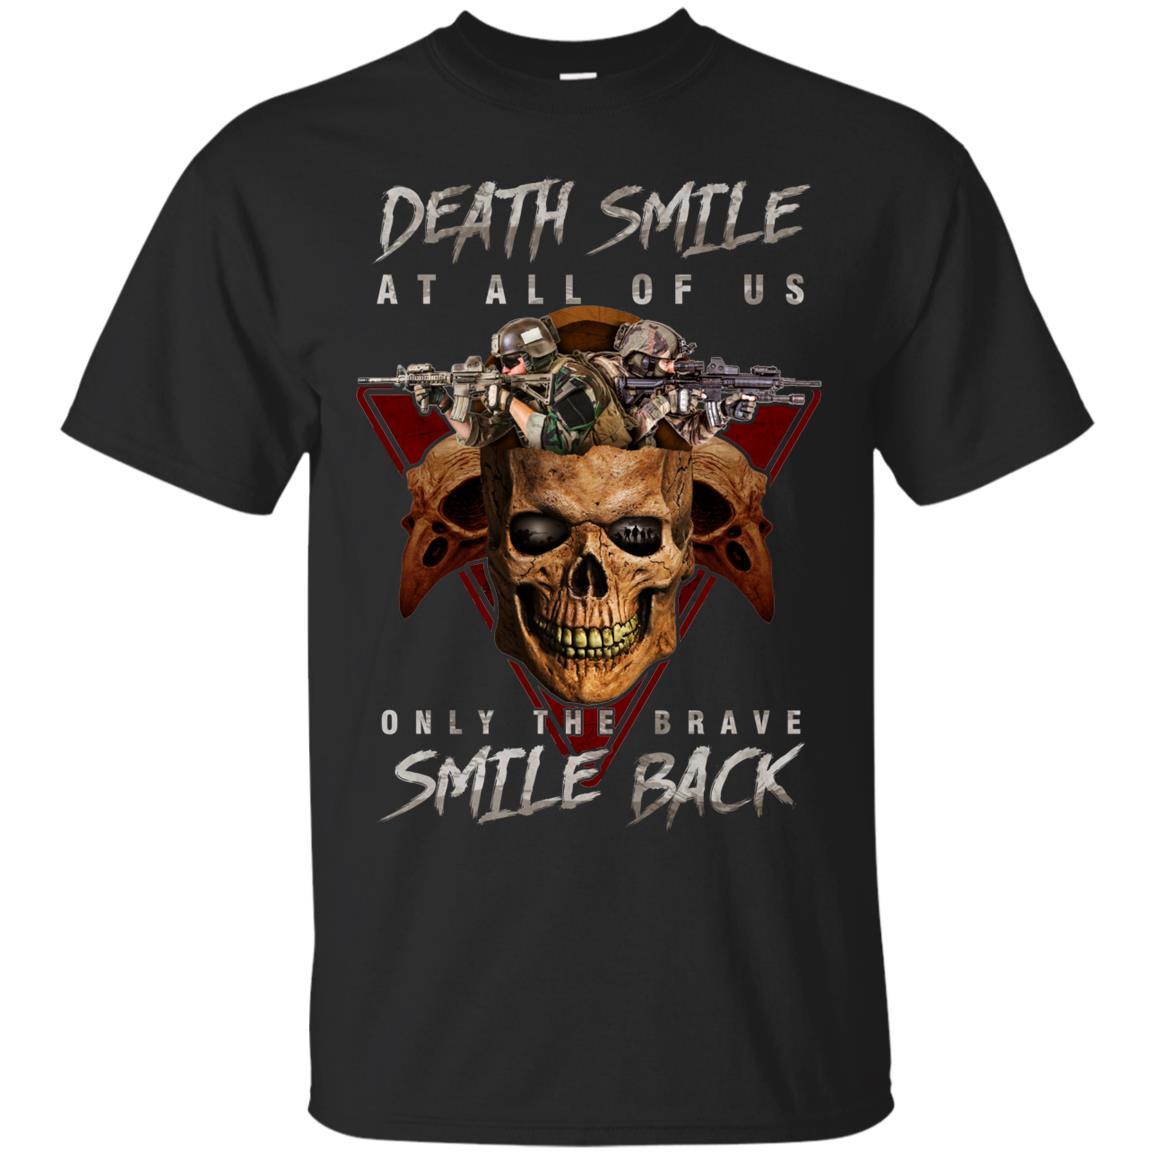 Military T-Shirt "Death Smile At All Of Us Only The Brave Smile Back Men" Front s-TShirt-General-Veterans Nation